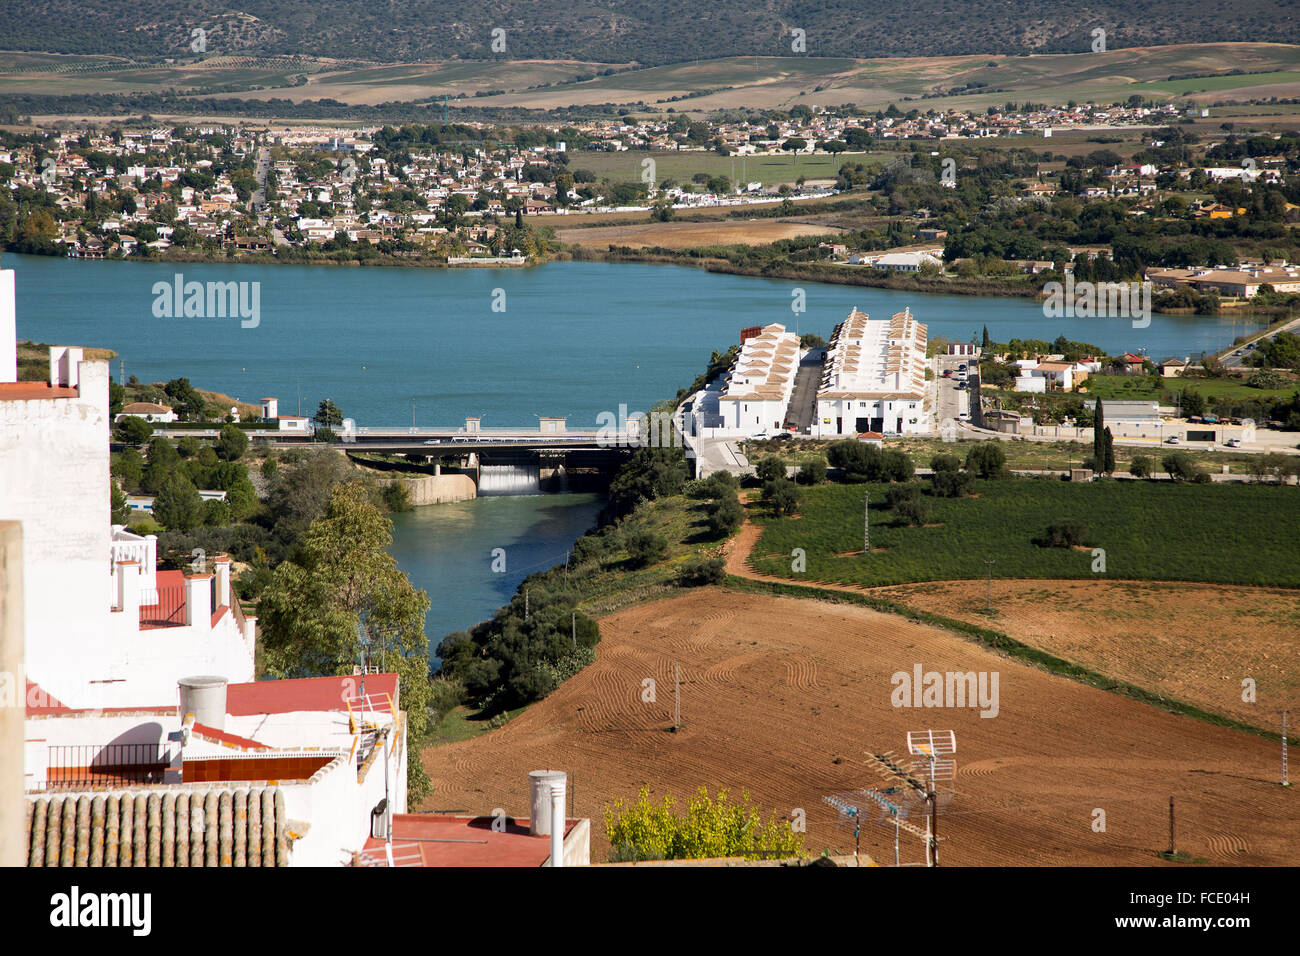 Reservoir lake occupying flooded valley land, village of Arcos de la Frontera, Cadiz province, Spain Stock Photo